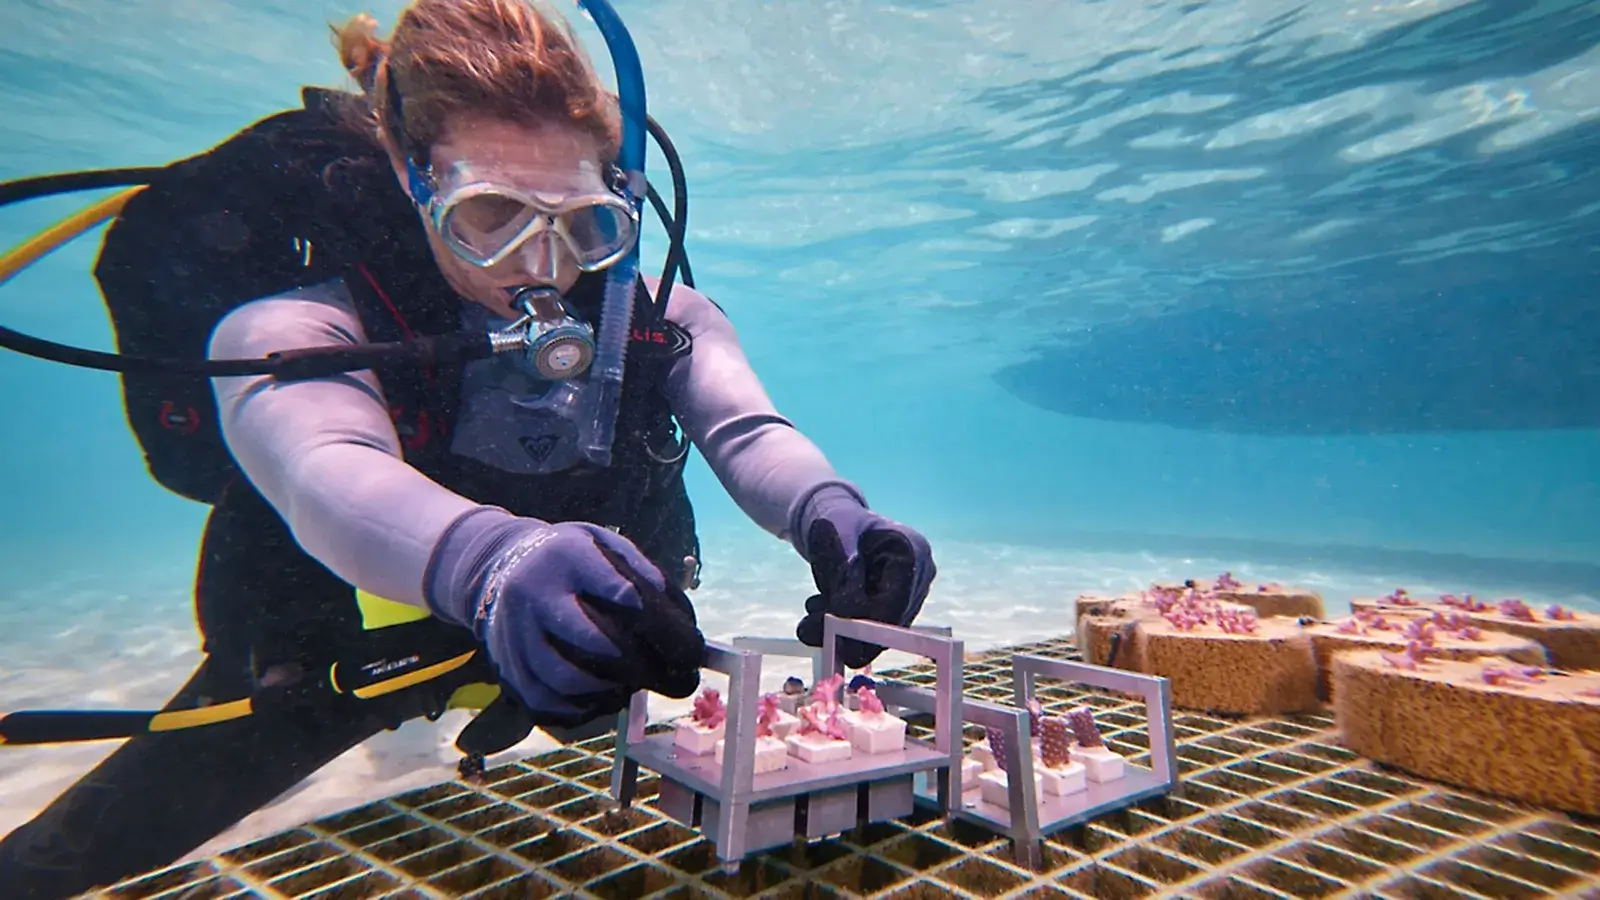 Novel restoration methods can speed up the recovery of threatened coral reefs to stop ocean warming and restore marine life